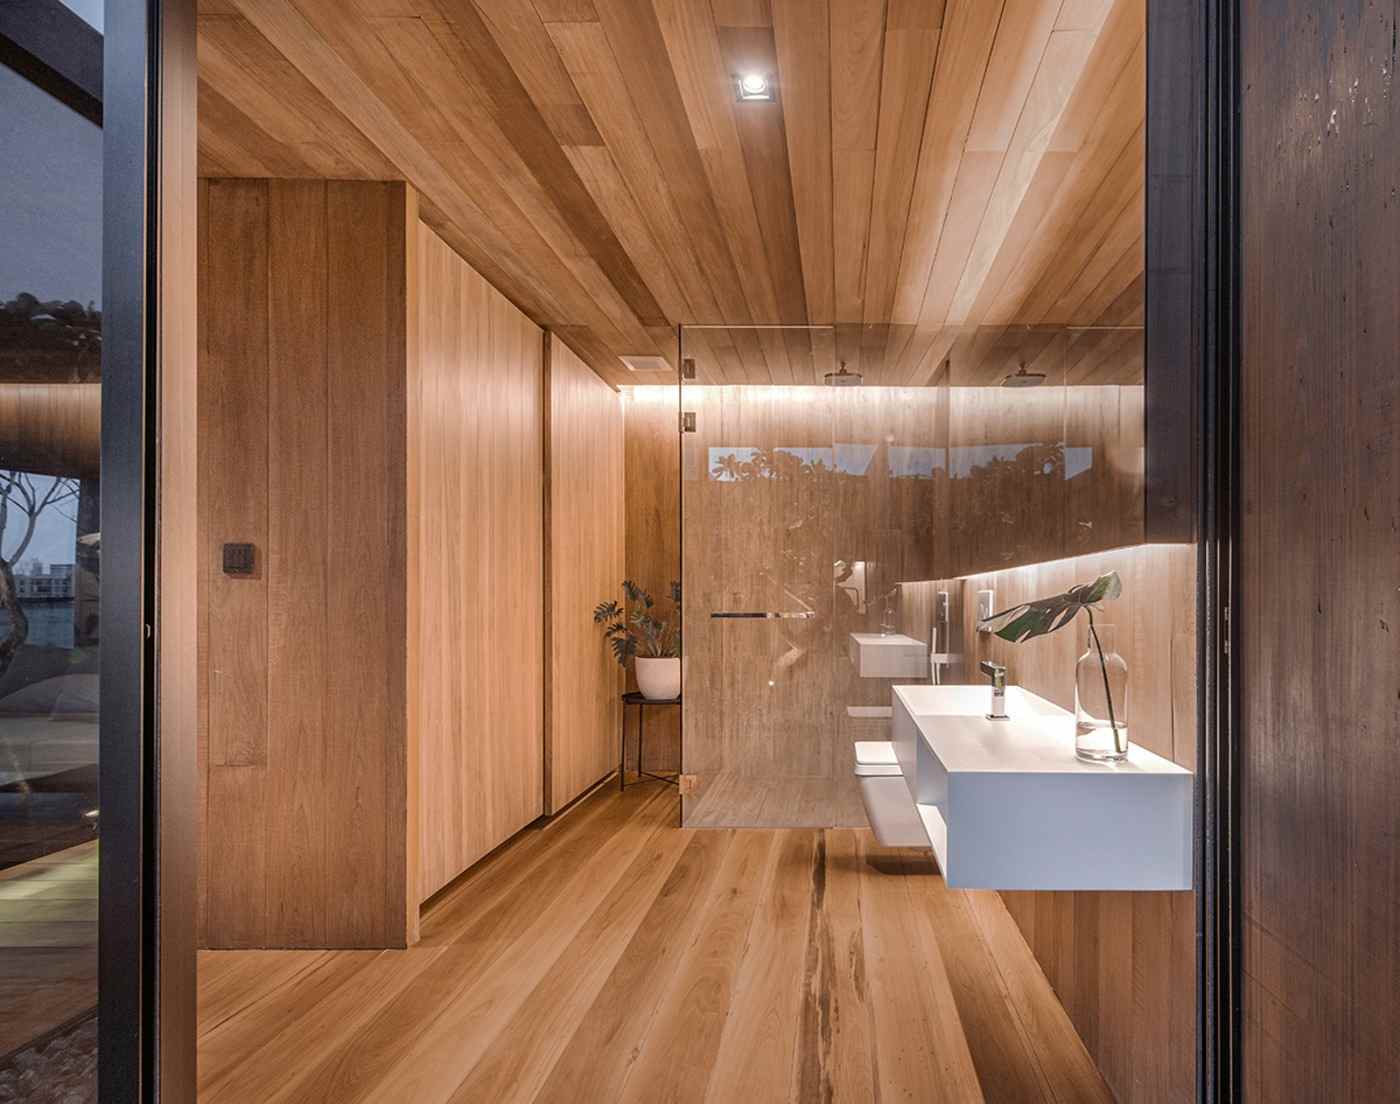 bath made of wood with splash wall for shower and white wash basin